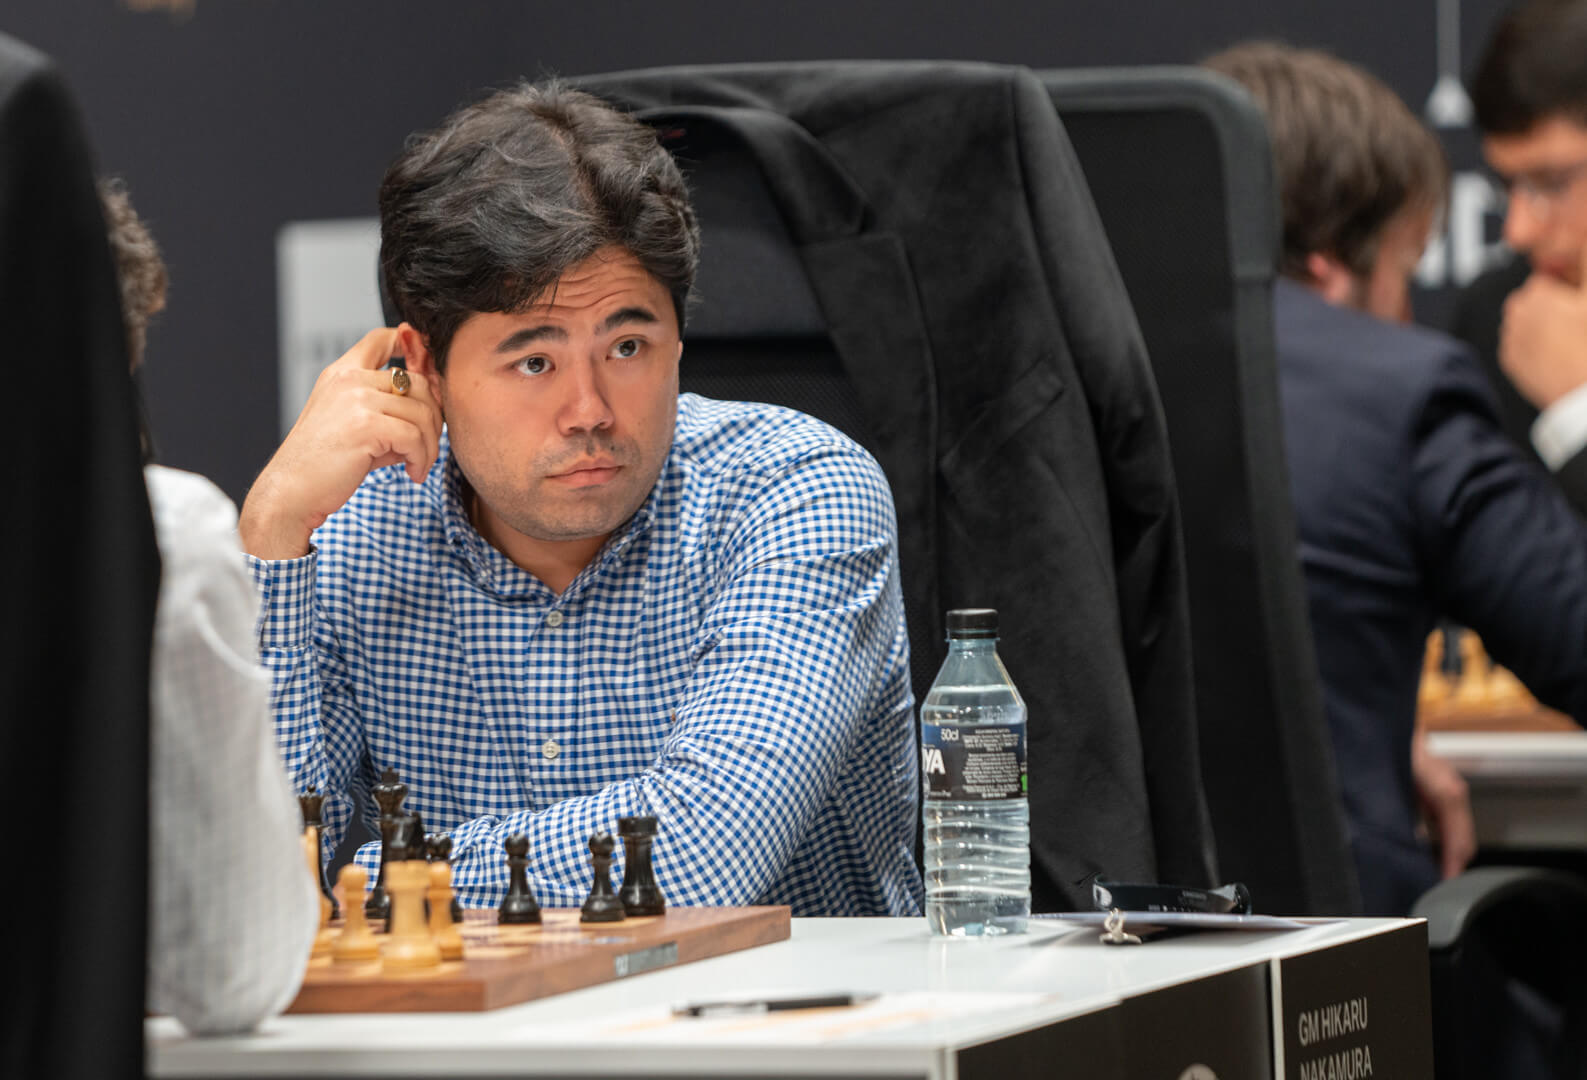 It's just another tournament I qualified for,” – Hikaru Nakamura after  qualifying for the Candidates Tournament